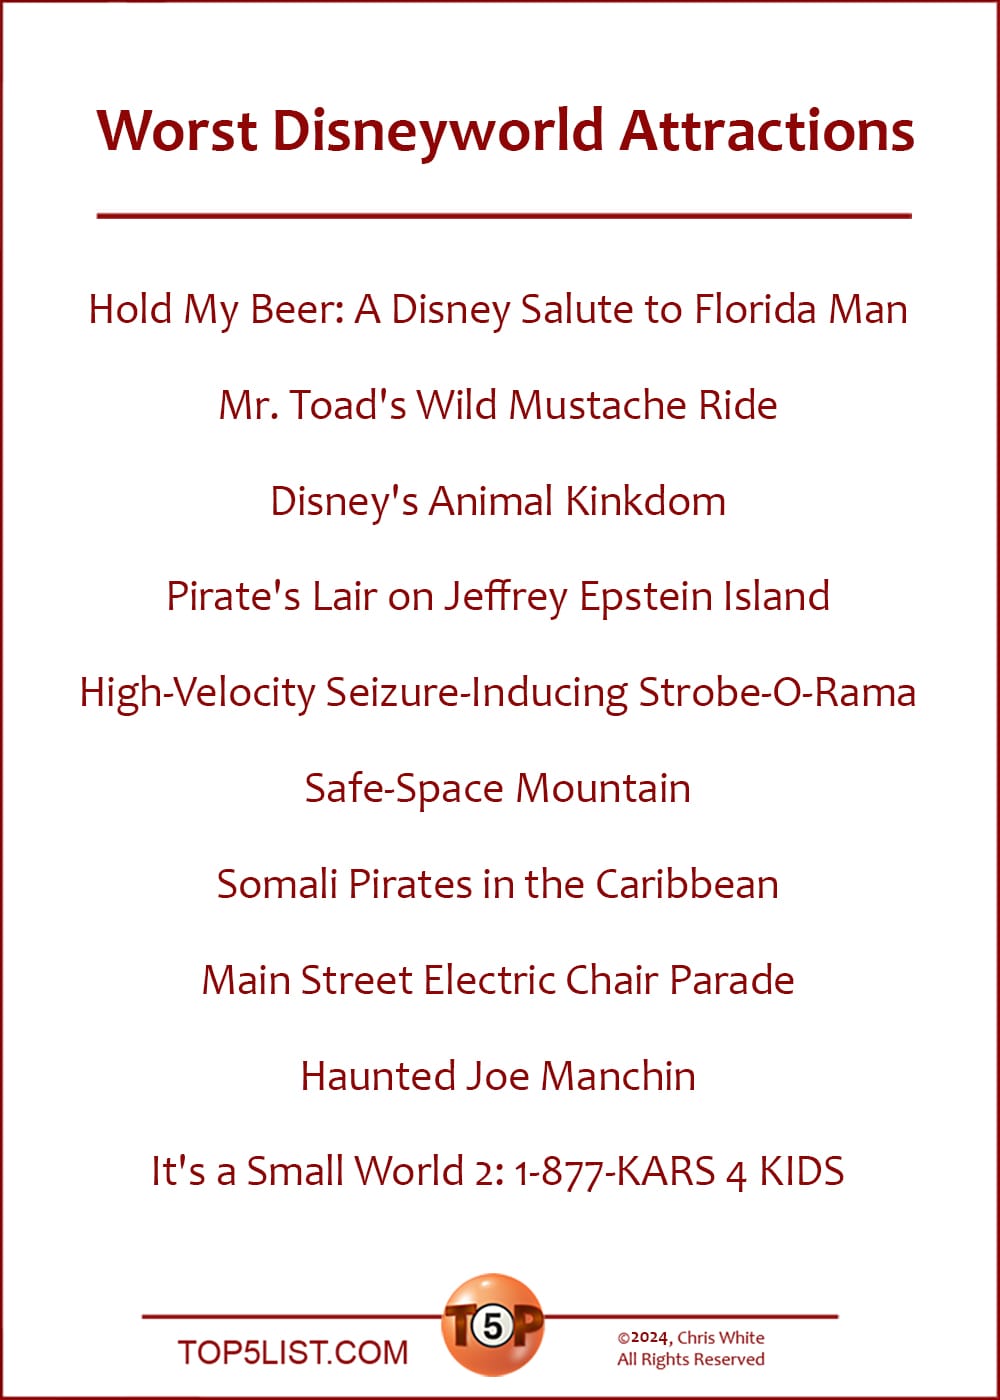 Worst Disneyworld Attractions  |  Hold My Beer: Disney's Salute to Florida Man  Mr. Toad's Wild Mustache Ride  Disney's Animal Kinkdom  Pirate's Lair on Jeffrey Epstein Island  High-Velocity Seizure-Inducing Strobe-O-Rama  Safe-Space Mountain  Somali Pirates in the Caribbean  Main Street Electric Chair Parade  Haunted Joe Manchin  It's a Small World 2: 1-877-KARS 4 KIDS